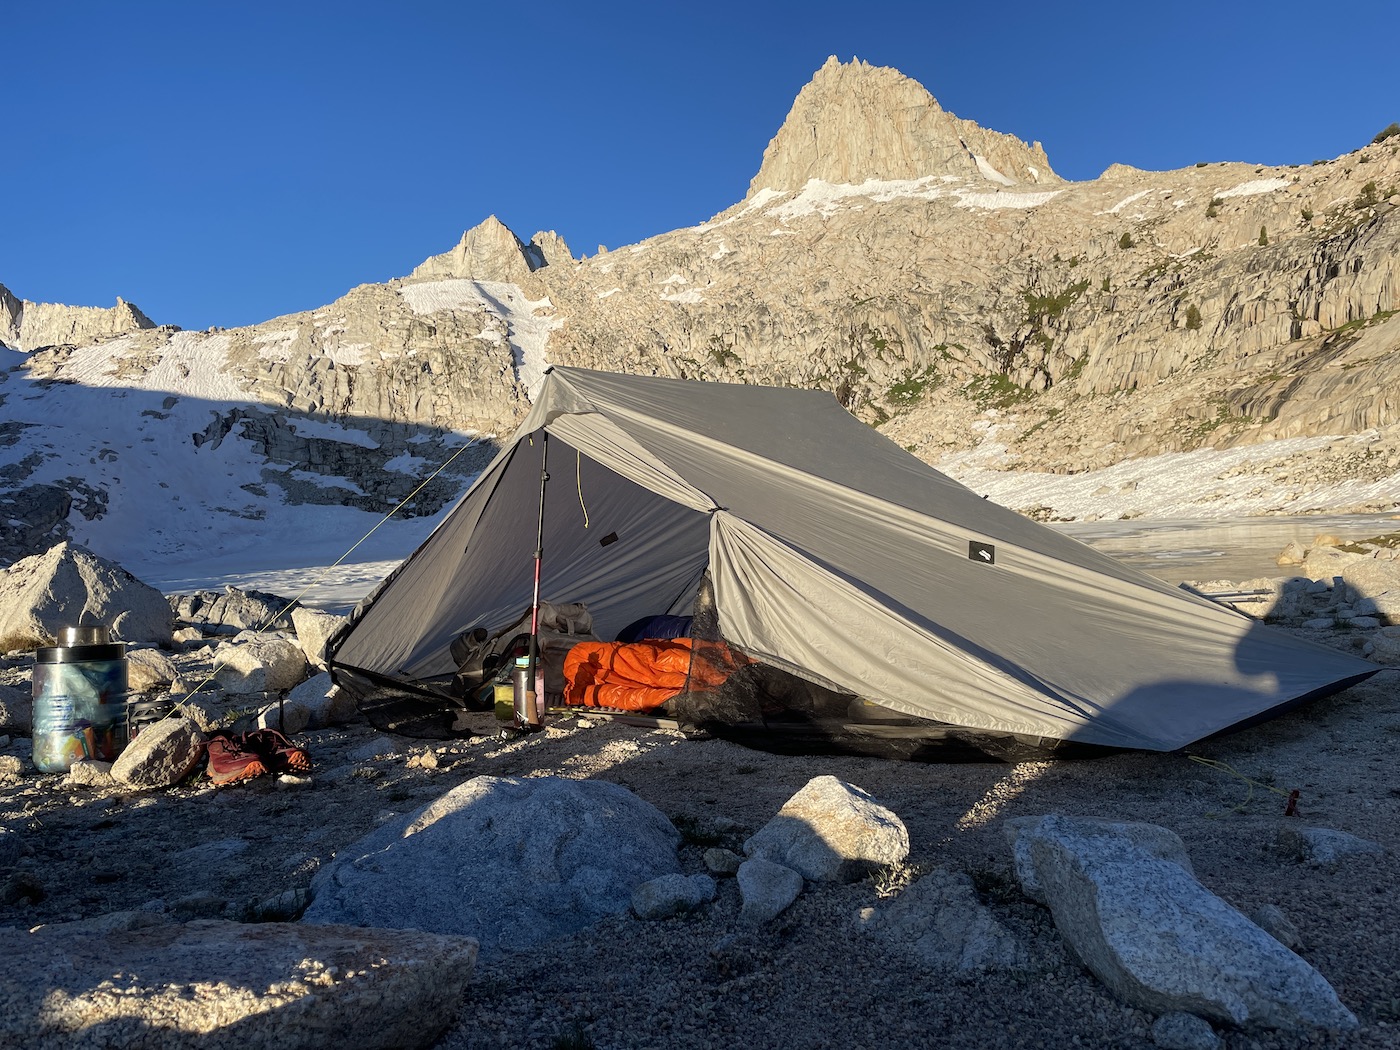 Best lightweight tent for backpacking set up in Yosemite